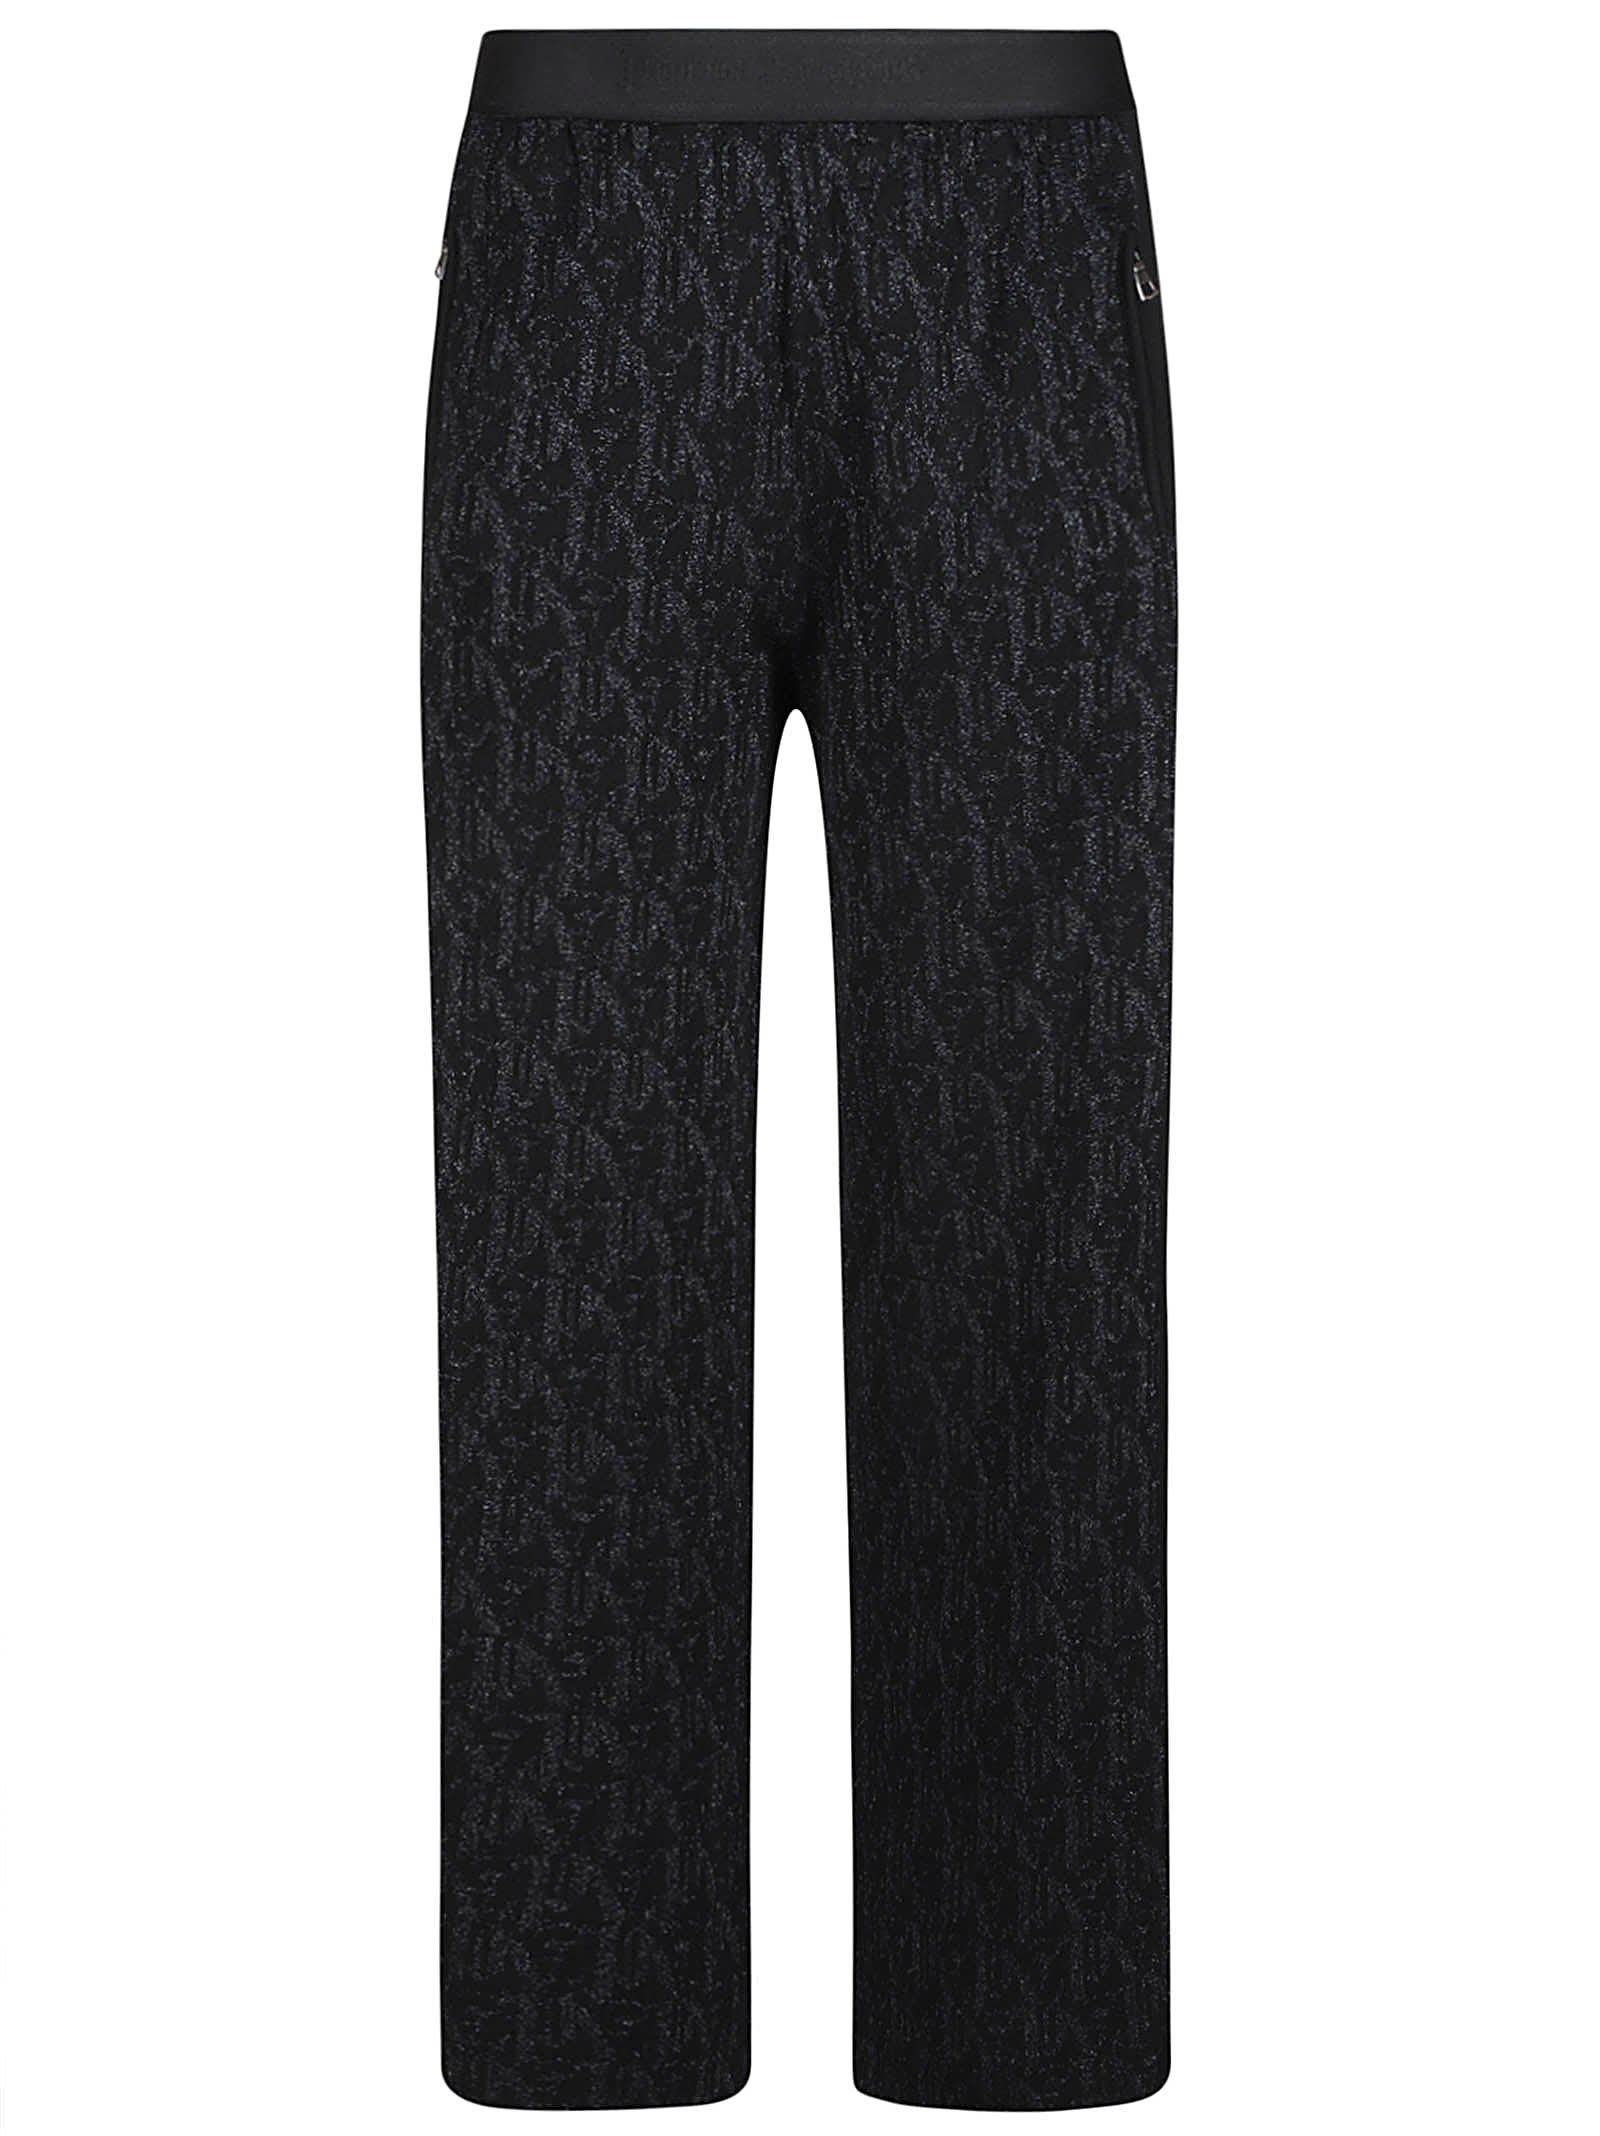 PALM ANGELS MONOGRAM JORD KNIT WIDE TROUSERS